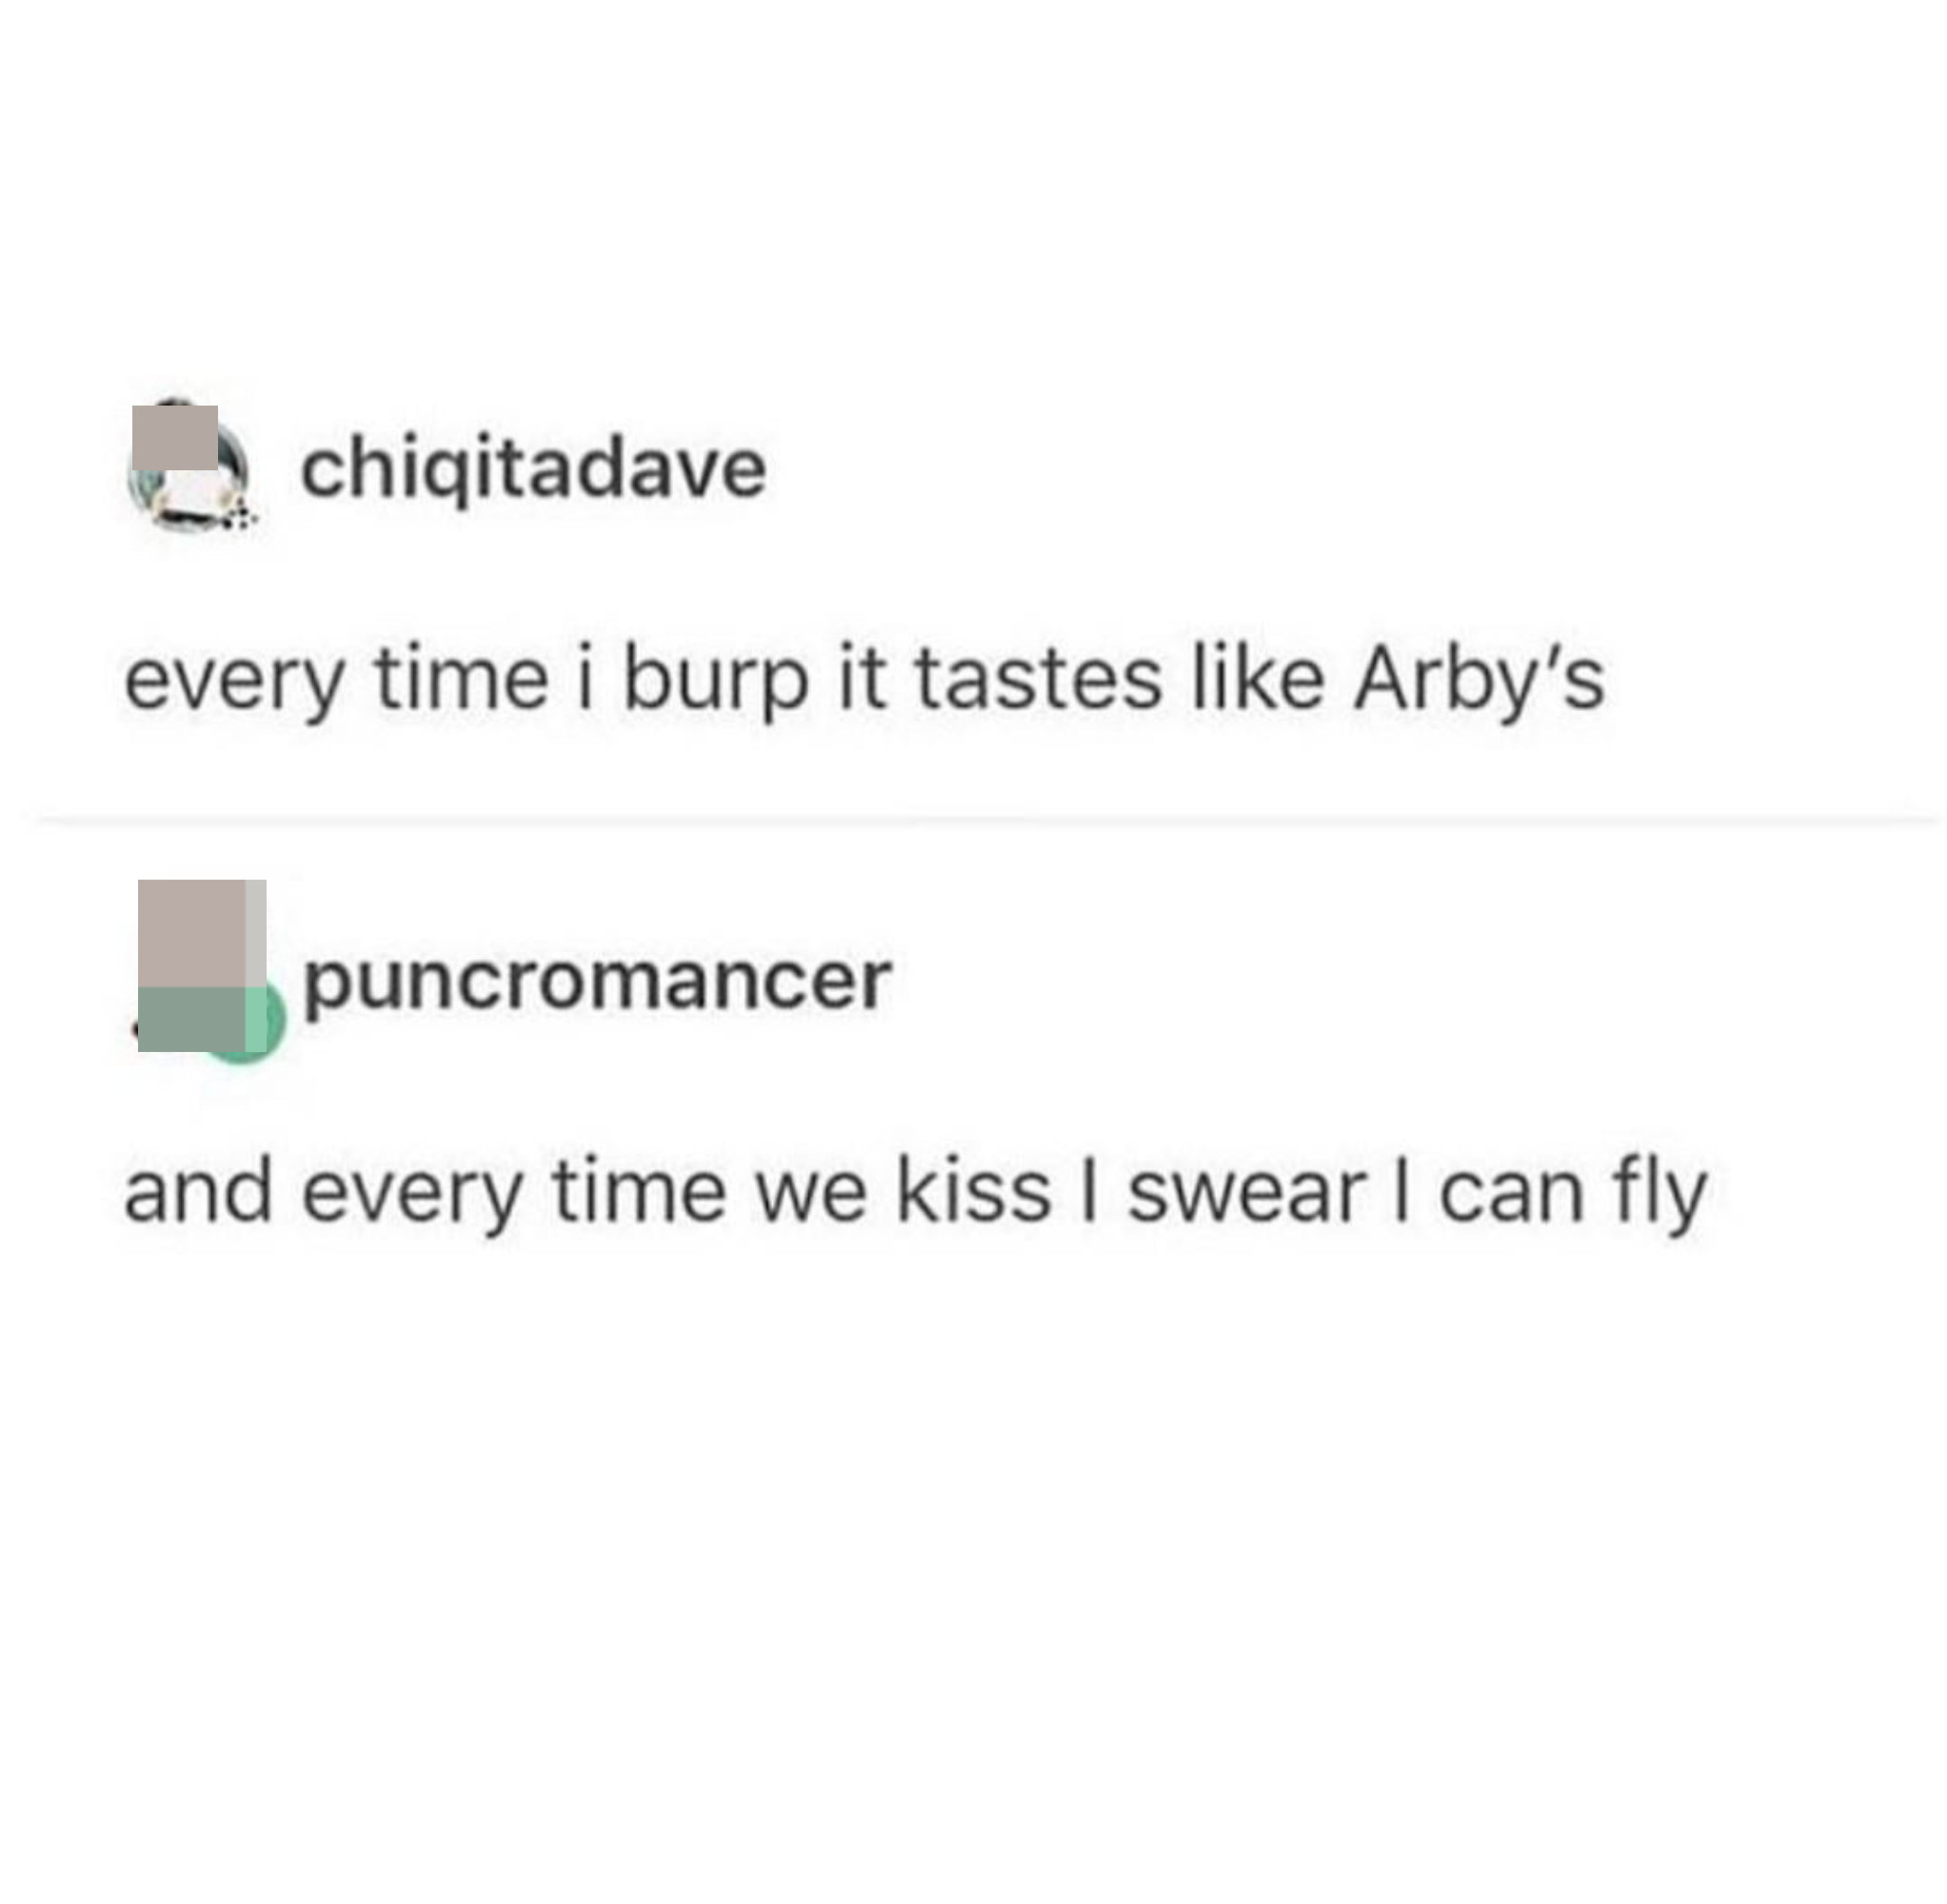 every time i burp it tastes like arby&#x27;s and someone leaves a comment that says, and every time we kiss i swear i can fly